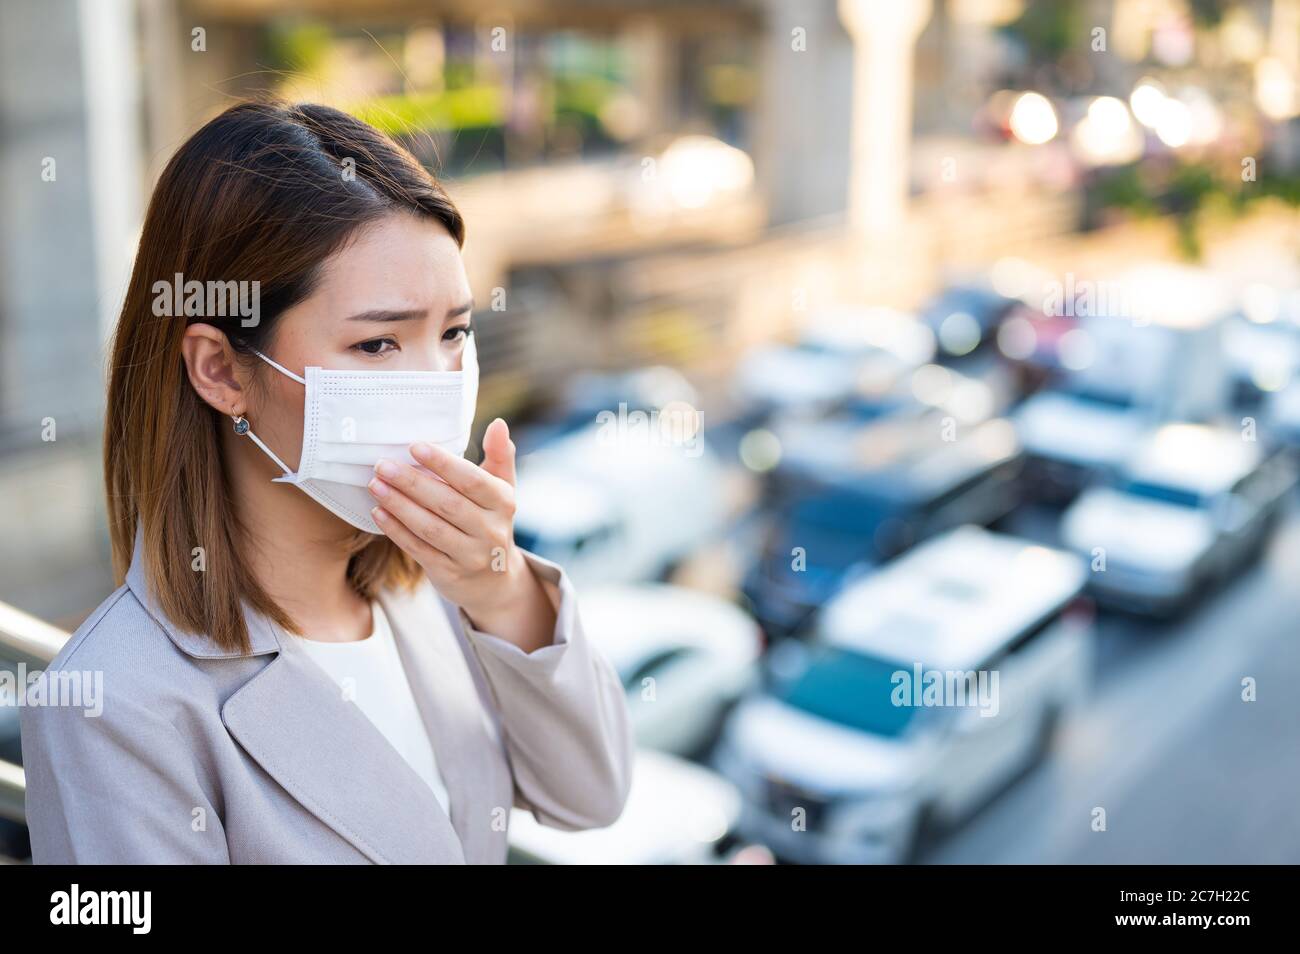 Young business woman wearing surgical mask and couging while walking in public in Coronavirus or COVID-19 spreading situation Stock Photo